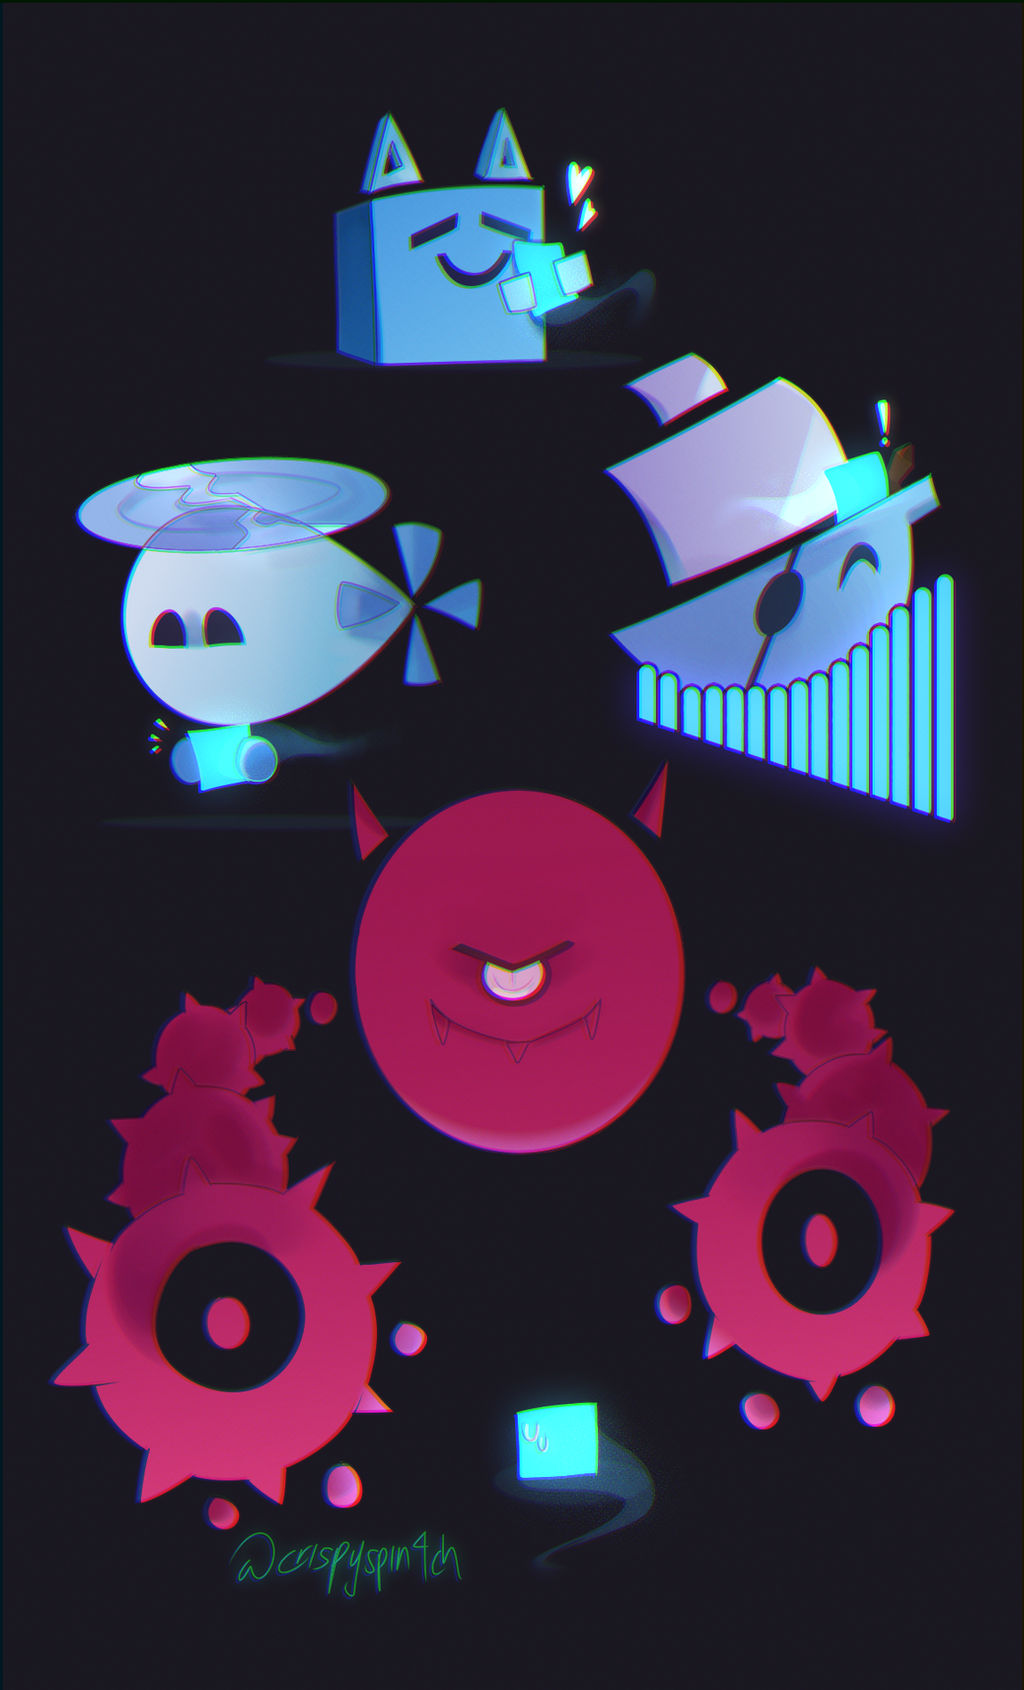 Just Shapes and Beats: Close to Me by ScorchedLavender on DeviantArt